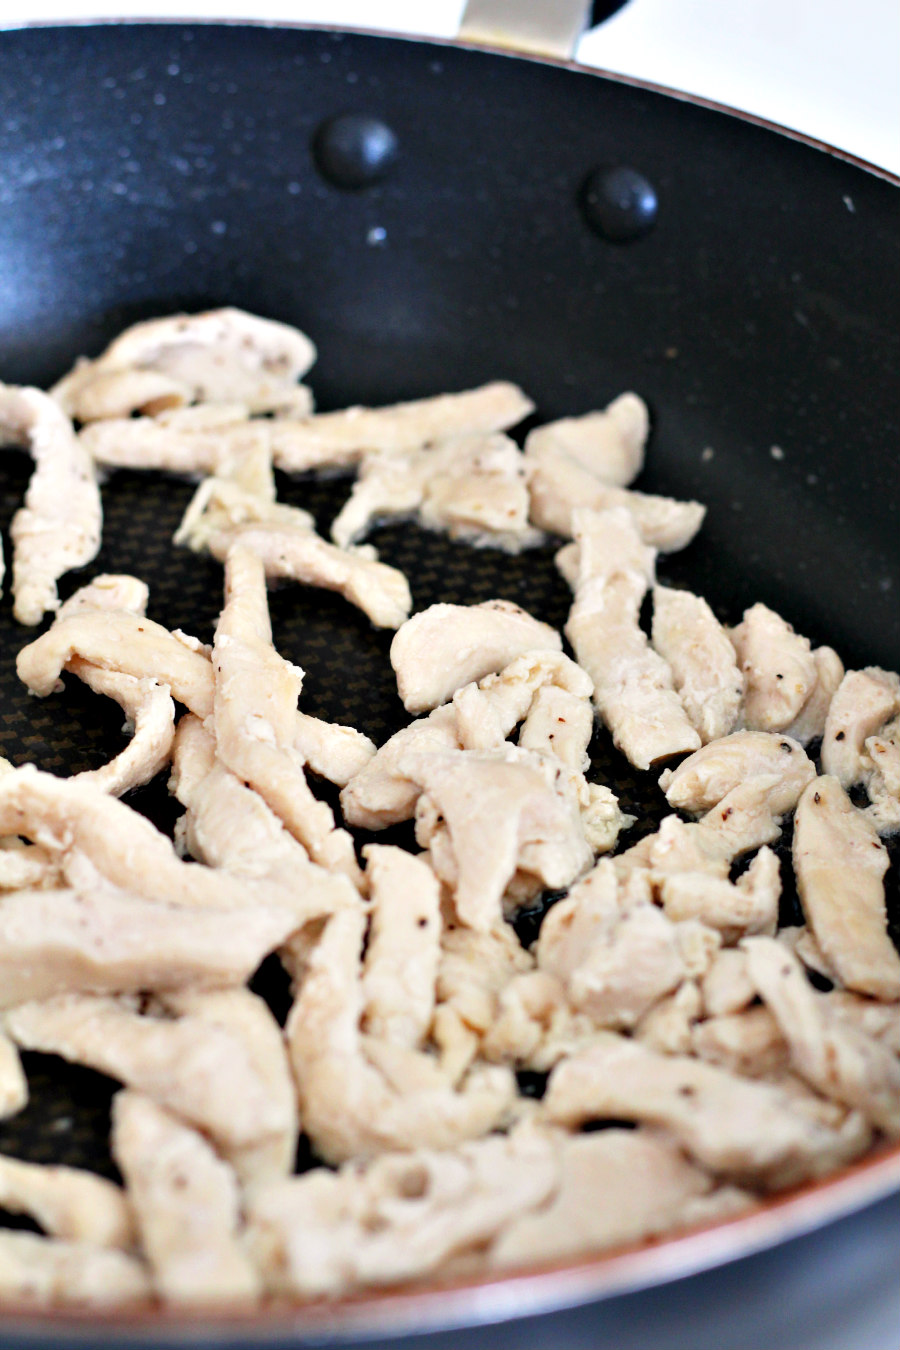 Chicken strips being cooked in a skillet on the stovetop.